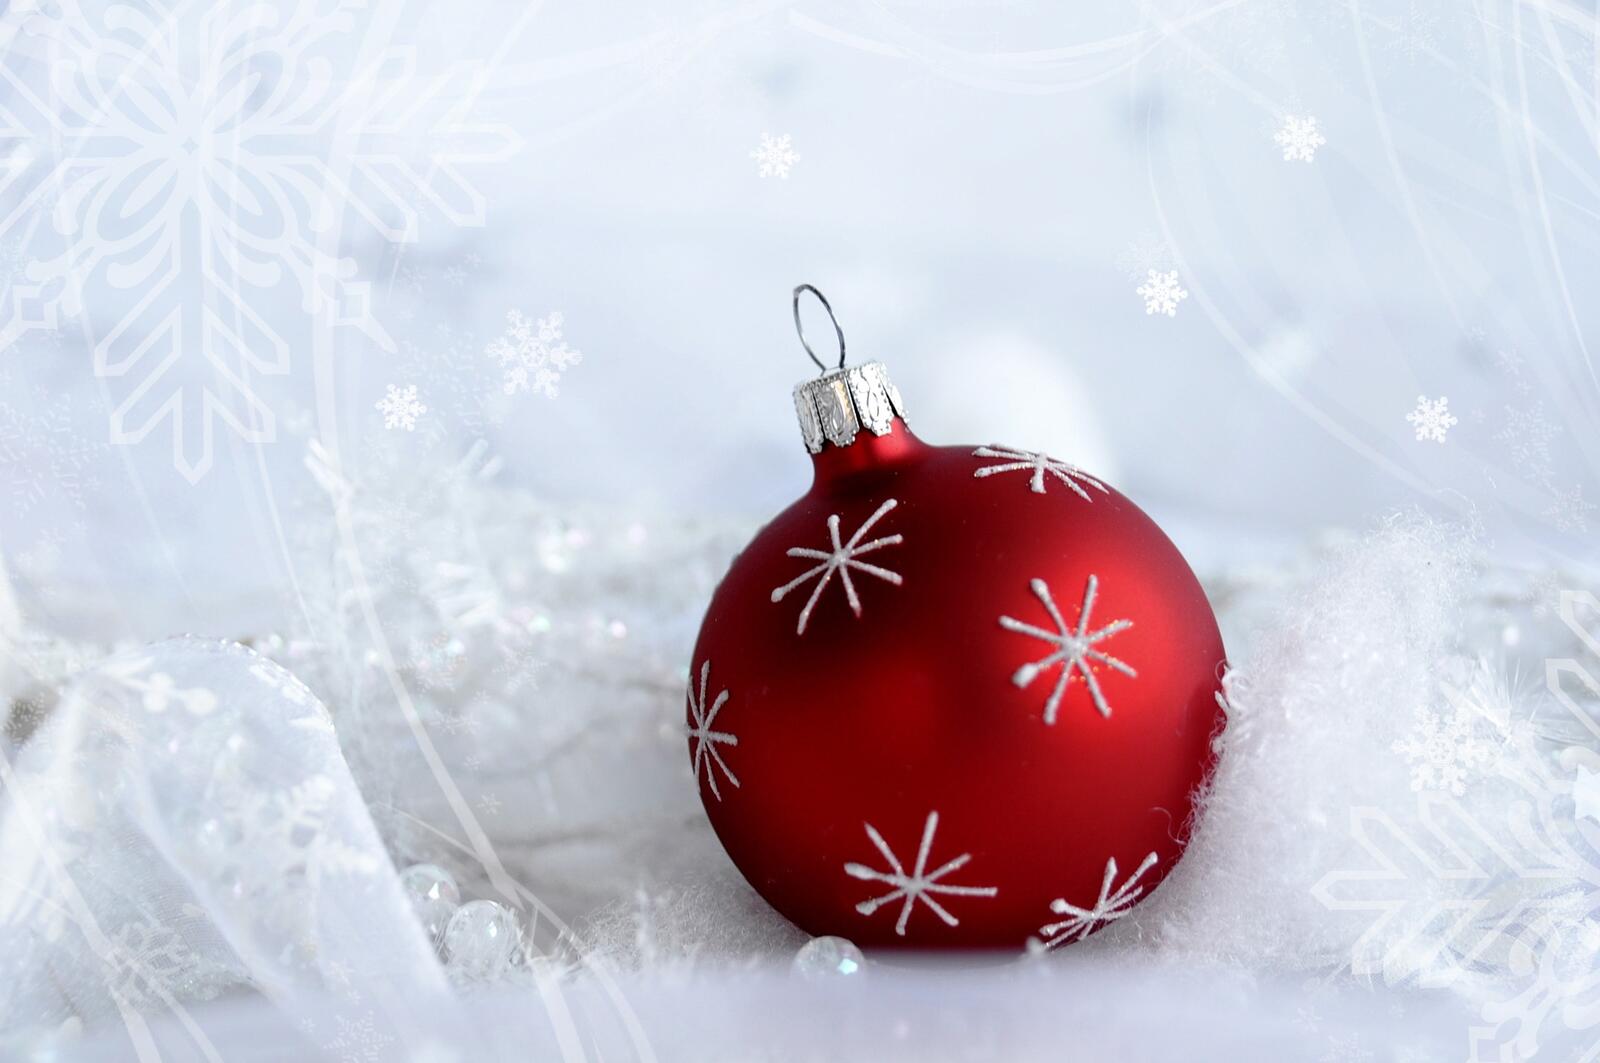 Wallpapers red bauble christmas bauble christmas time on the desktop